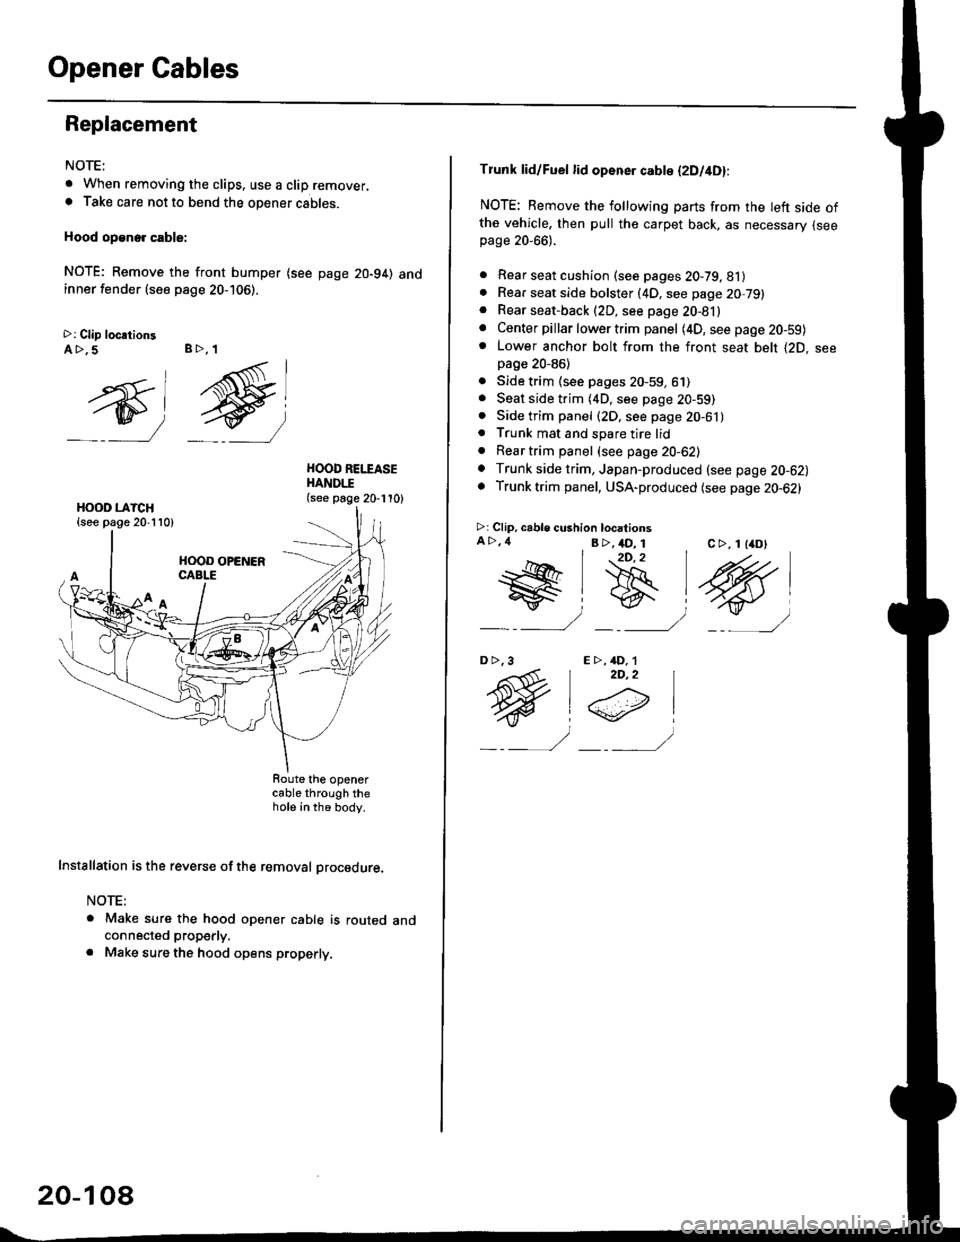 HONDA CIVIC 2000 6.G Workshop Manual Opener Cables
Replacement
NOTE:
t When removing the clips. use a clip remover.. Take care not to bend the opener cables.
Hood op€ne. cable:
NOTE; Remove the front bumper (see page 20-94) andinner fe